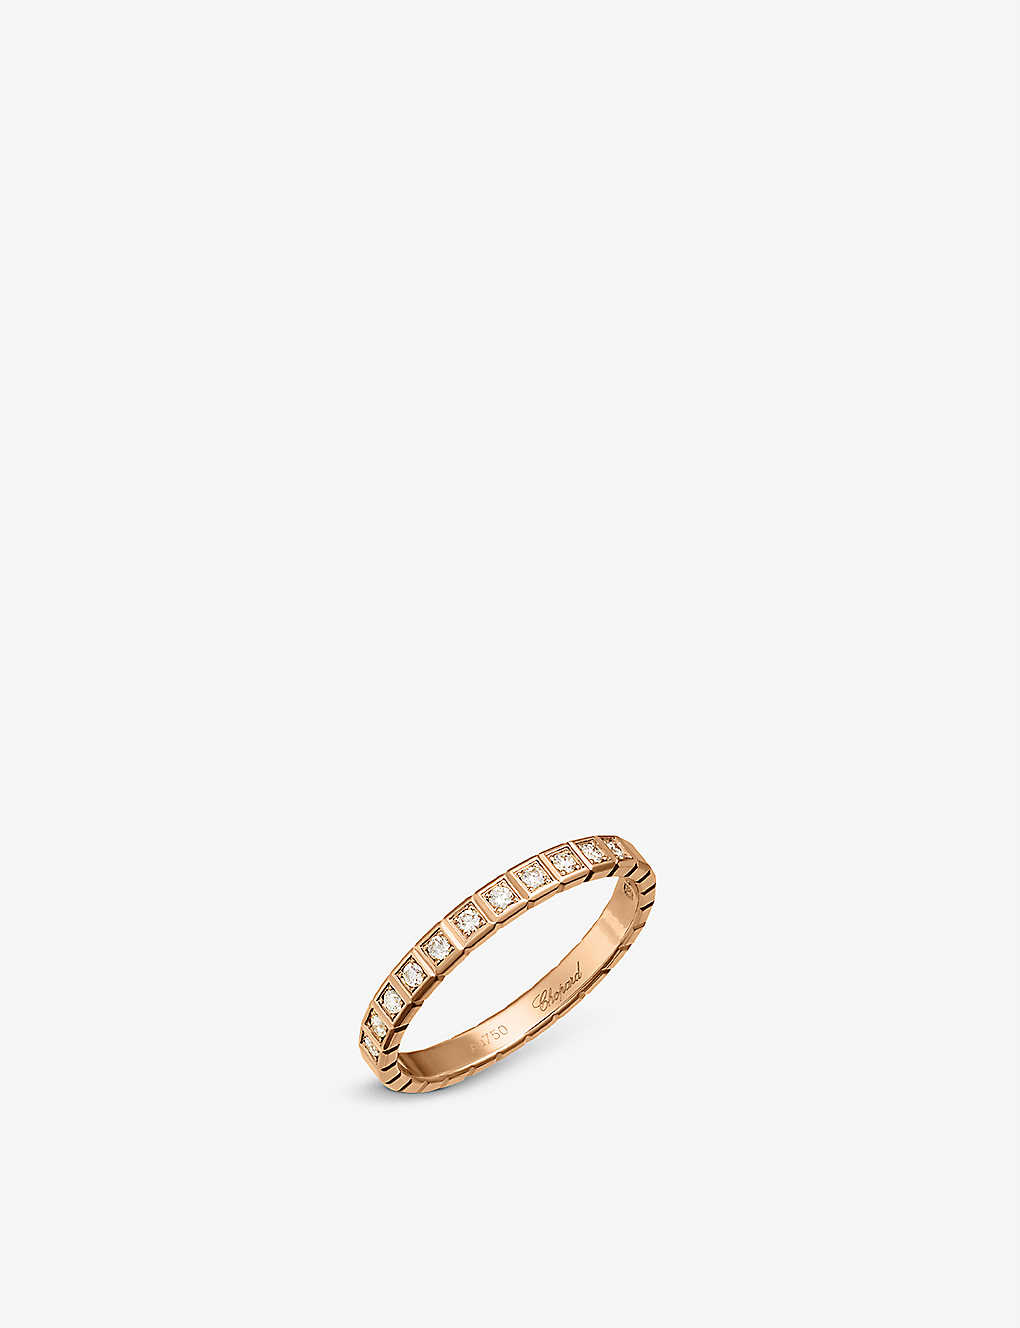 Chopard Ice Cube Pure 18ct Rose-gold Diamond Ring In Fairmined Rose Gold